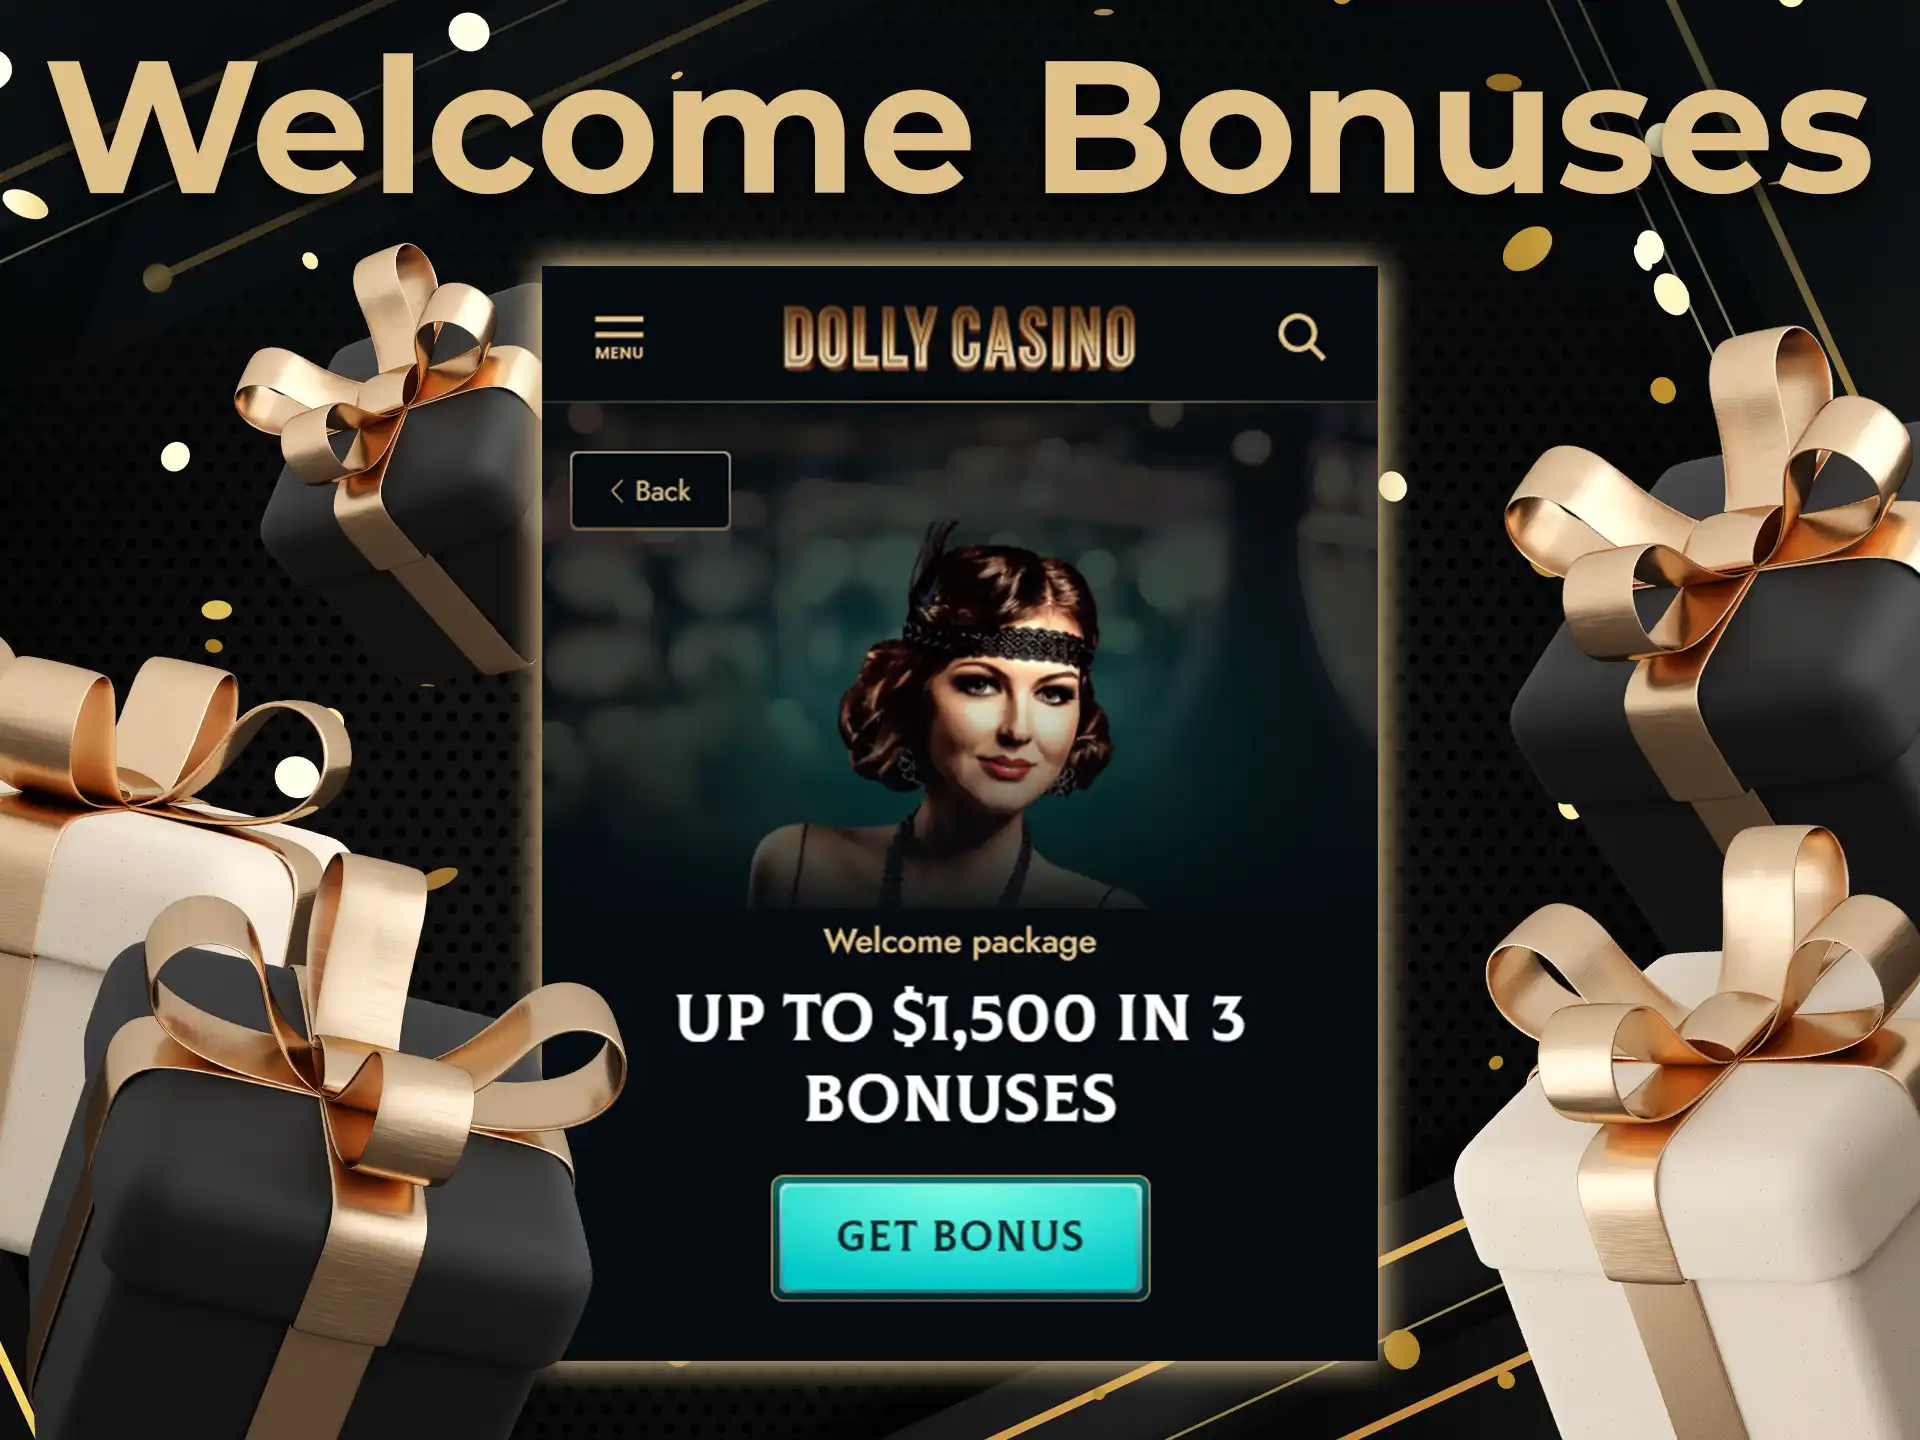 Every new player can use a welcome bonus of up to AUD 1,500.